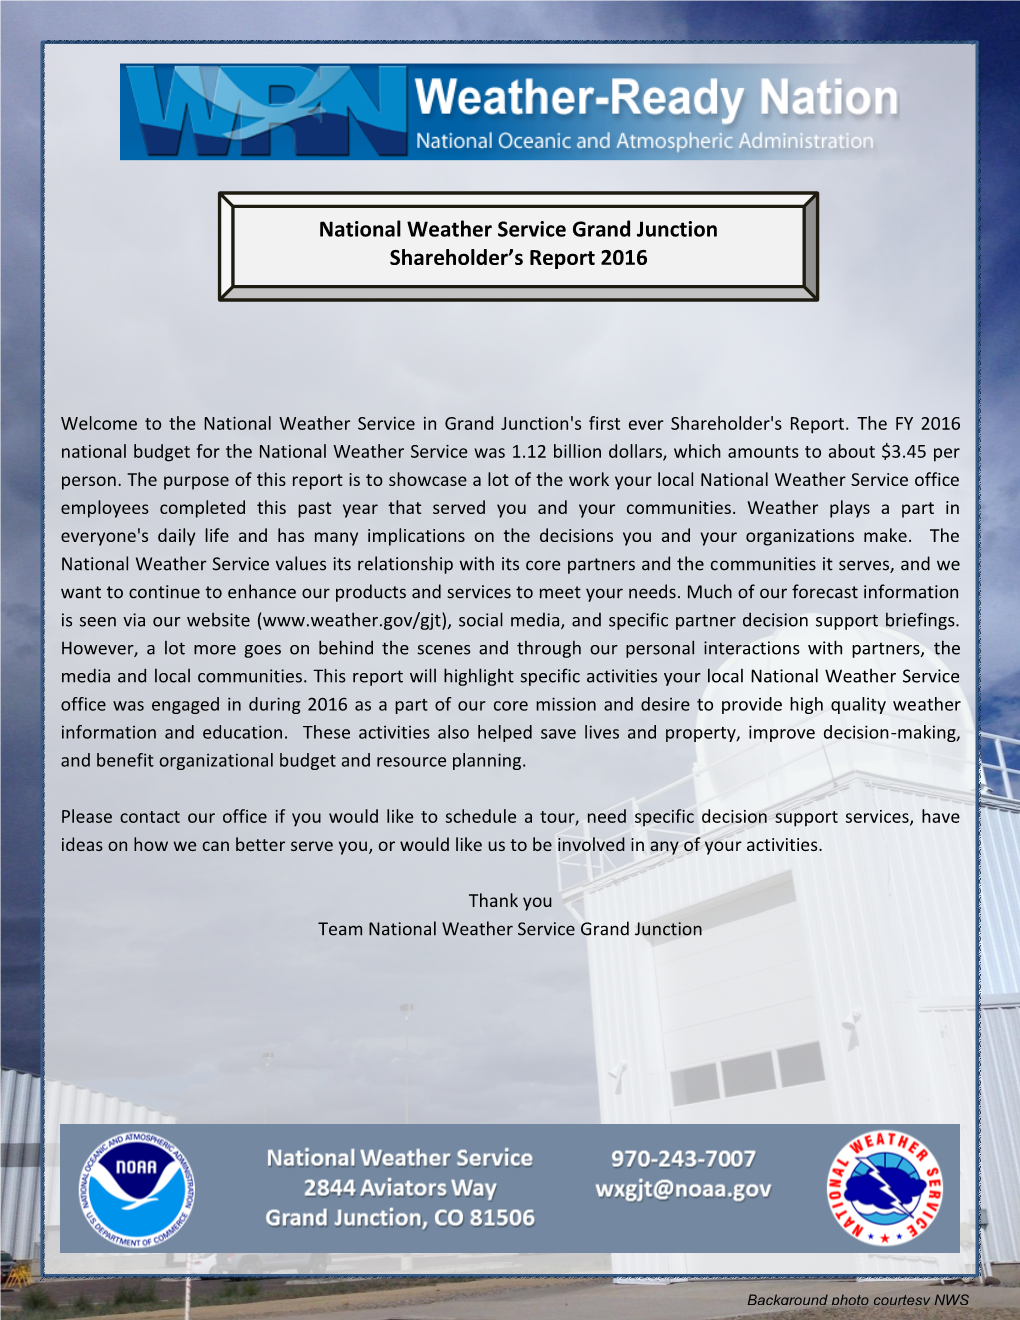 National Weather Service Grand Junction Shareholder's Report 2016